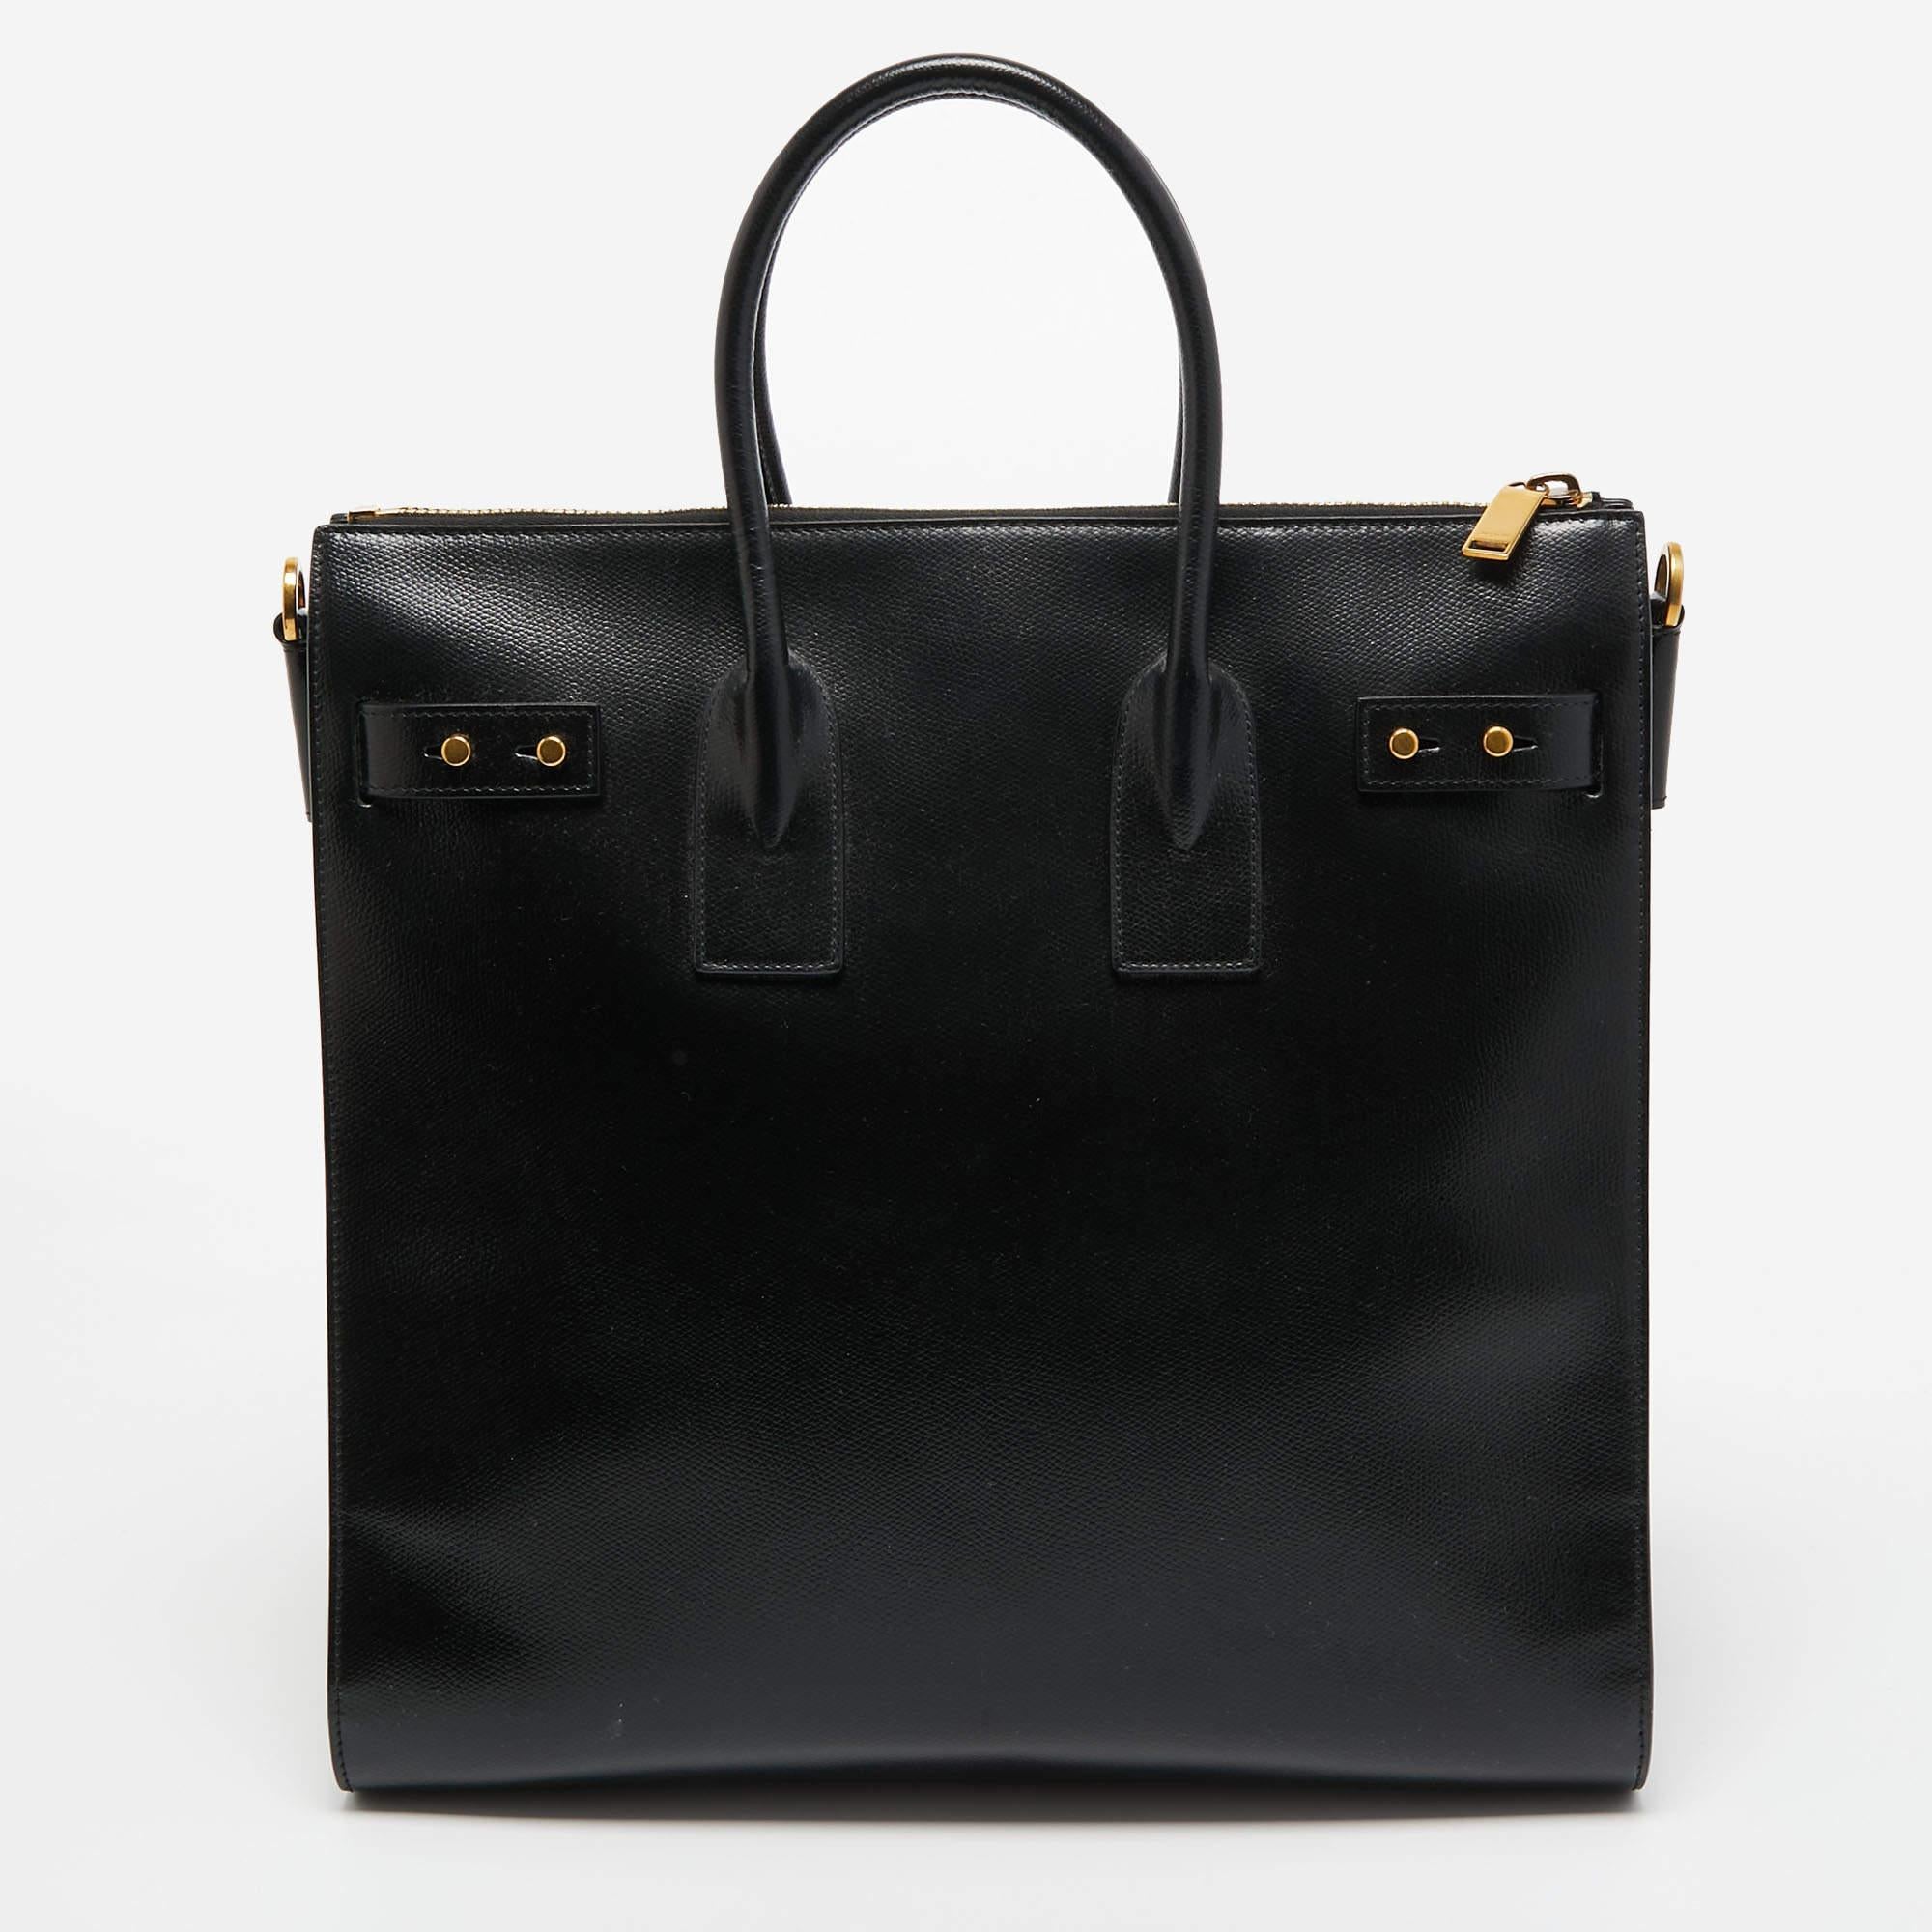 This Saint Laurent tote is an example of the brand's fine designs that are skillfully crafted to project a classic charm. It is a functional creation with an elevating appeal.

Includes: Original Dustbag, Detachable Strap, Info Booklet, Lock and